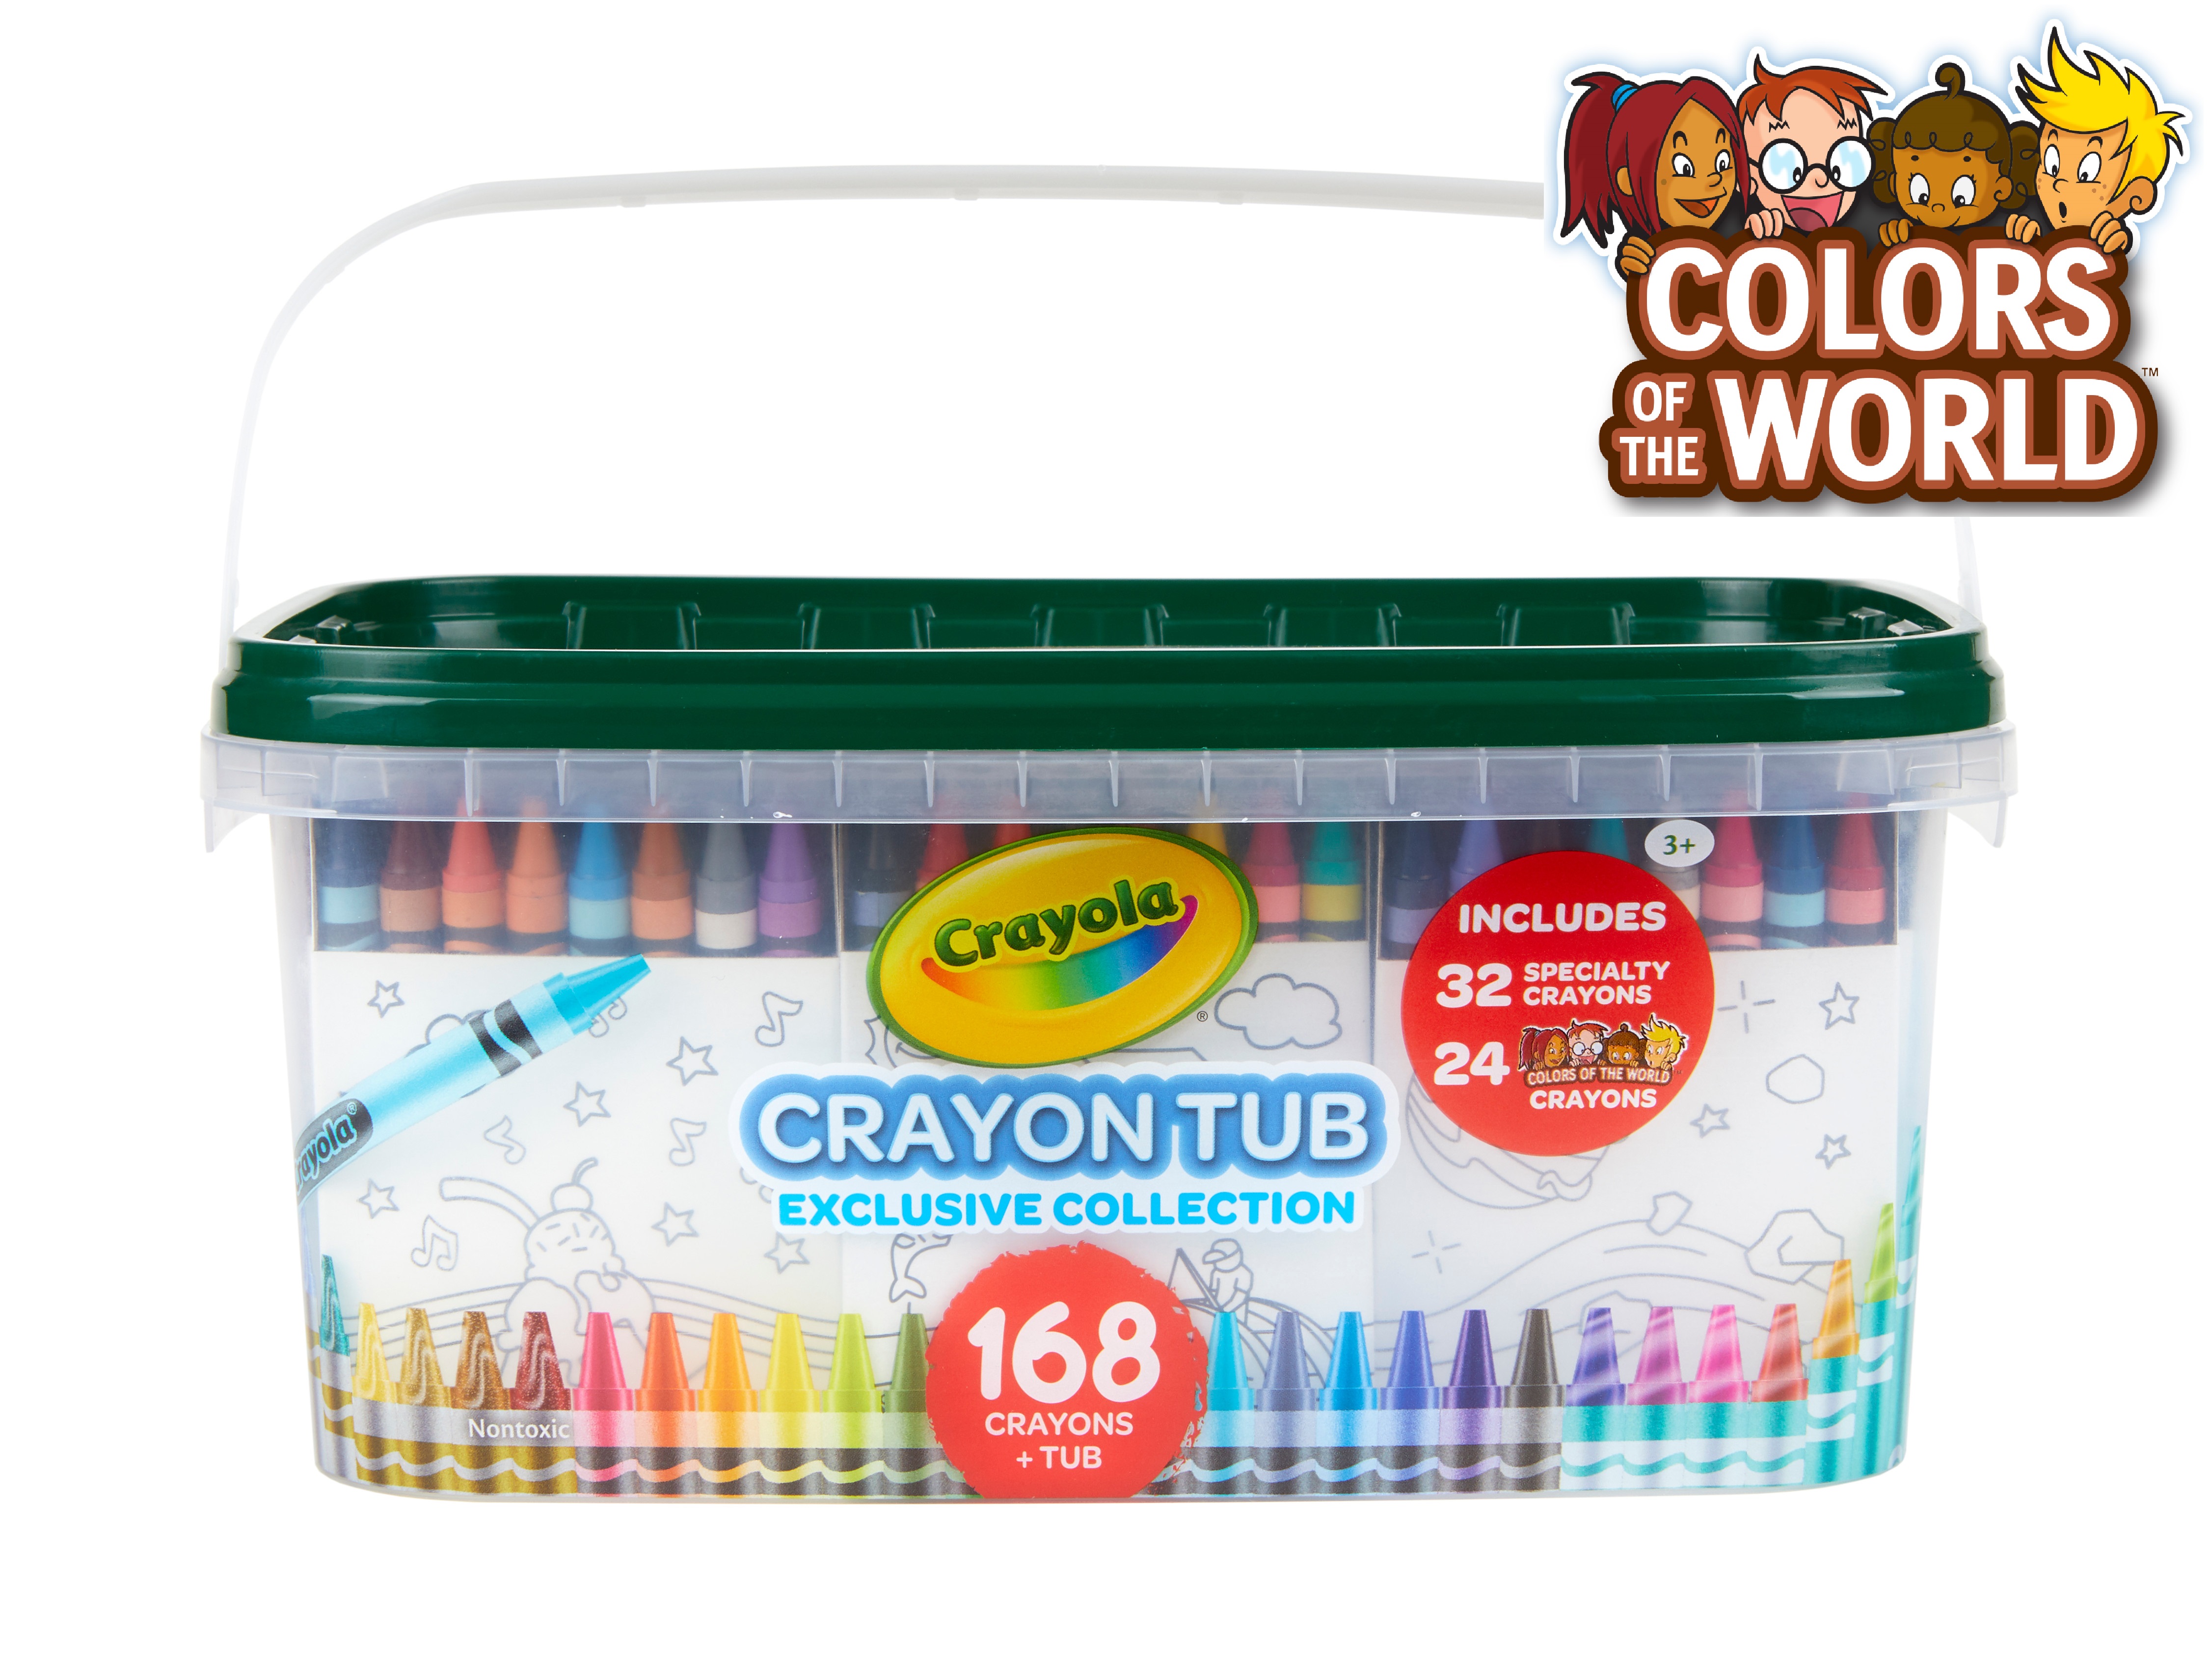 Crayola Crayon & Storage Tub, School Supplies, 168 Ct, with Colors of the World Crayons, Holiday Gift for Kids - image 1 of 9